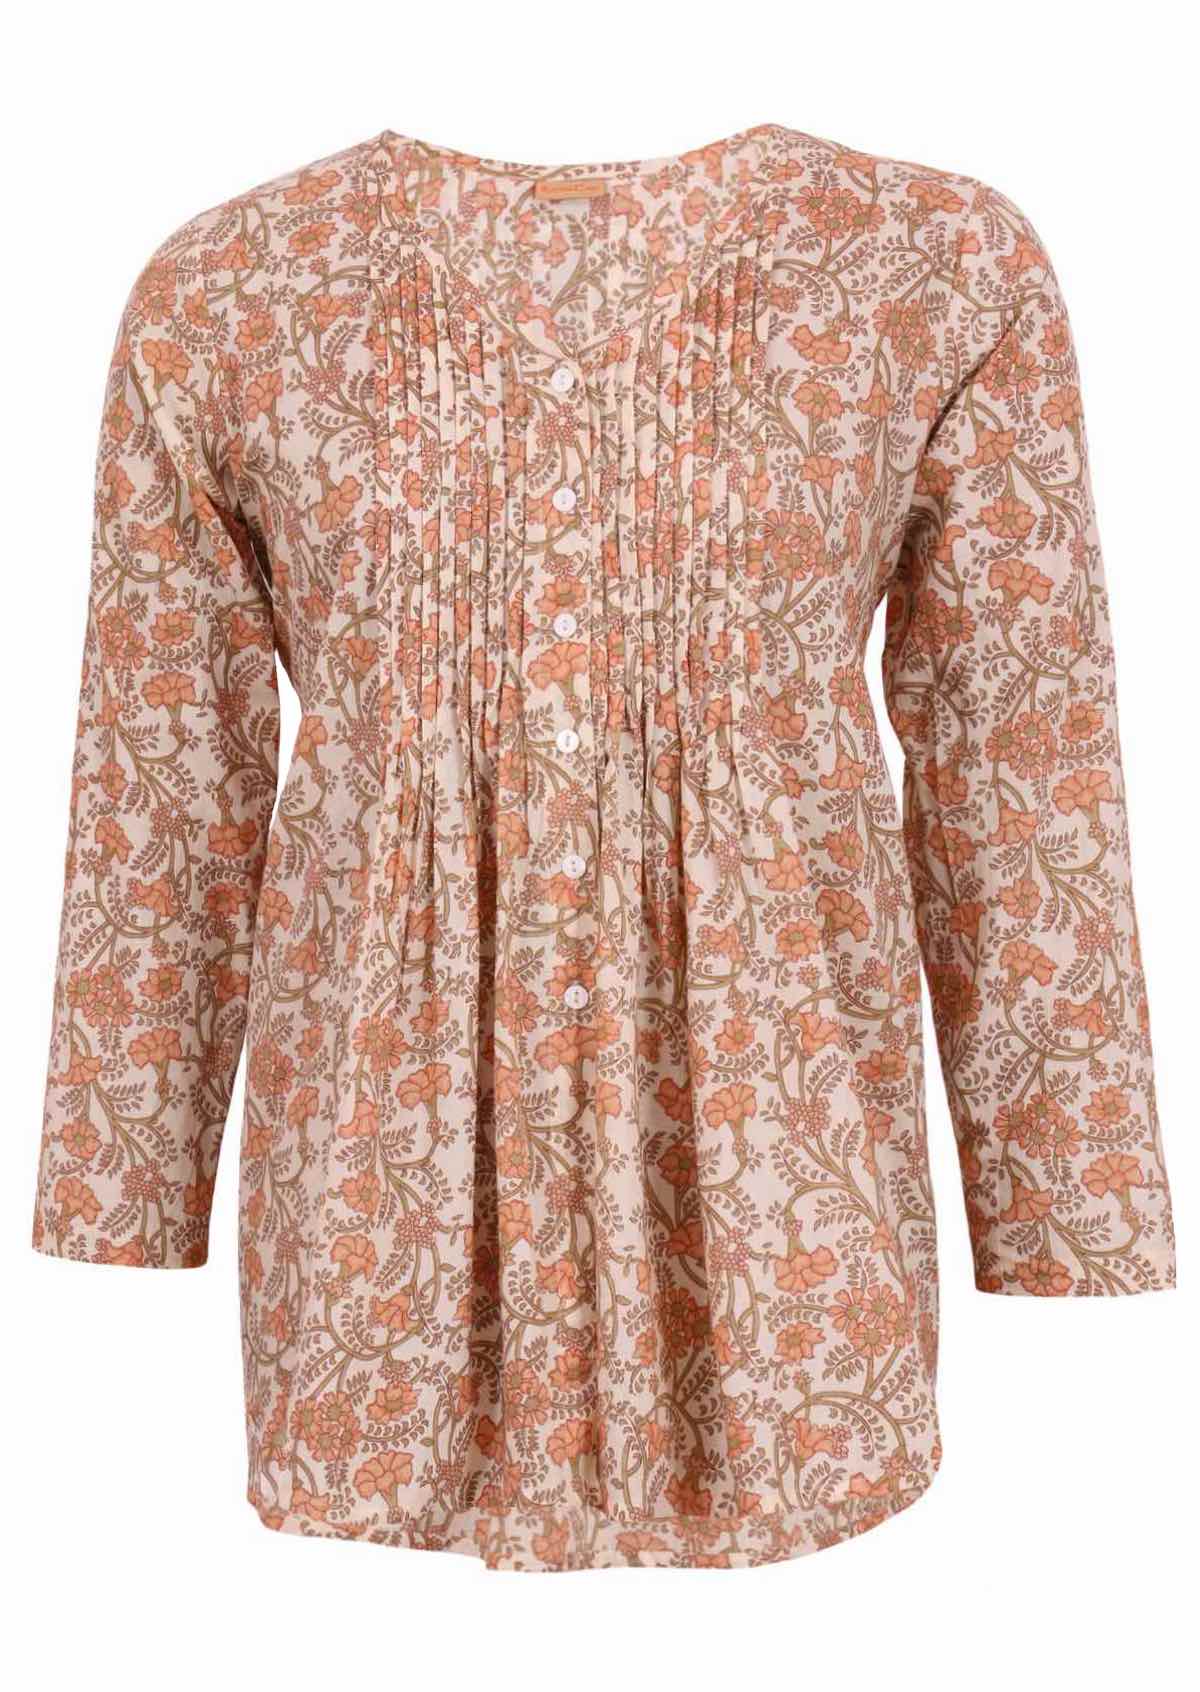 Cream floral v neck blouse with pin tuck pleating detail on yoke